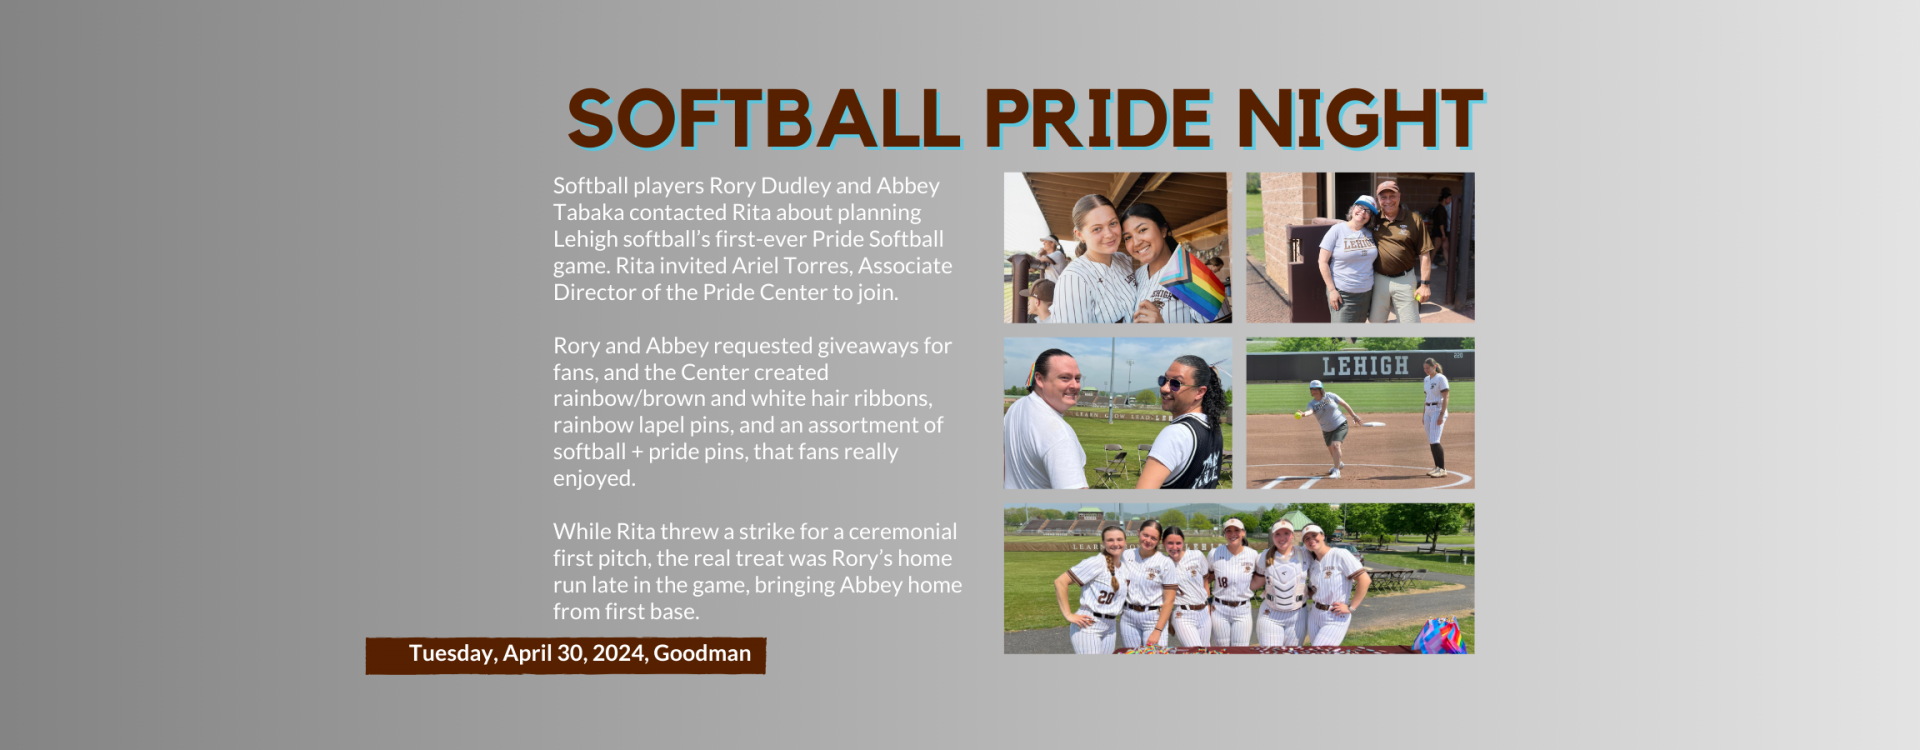 Softball players Rory Dudley and Abbey Tabaka contacted Rita about planning Lehigh softball’s first-ever Pride Softball game. Rita invited Ariel Torres, Associate Director of the Pride Center to join.  Rory and Abbey requested giveaways for fans, and the Center created rainbow/brown and white hair ribbons, rainbow lapel pins, and an assortment of softball + pride pins, that fans really enjoyed.  While Rita threw a strike for a ceremonial first pitch, the real treat was Rory’s home run late in the game, brin